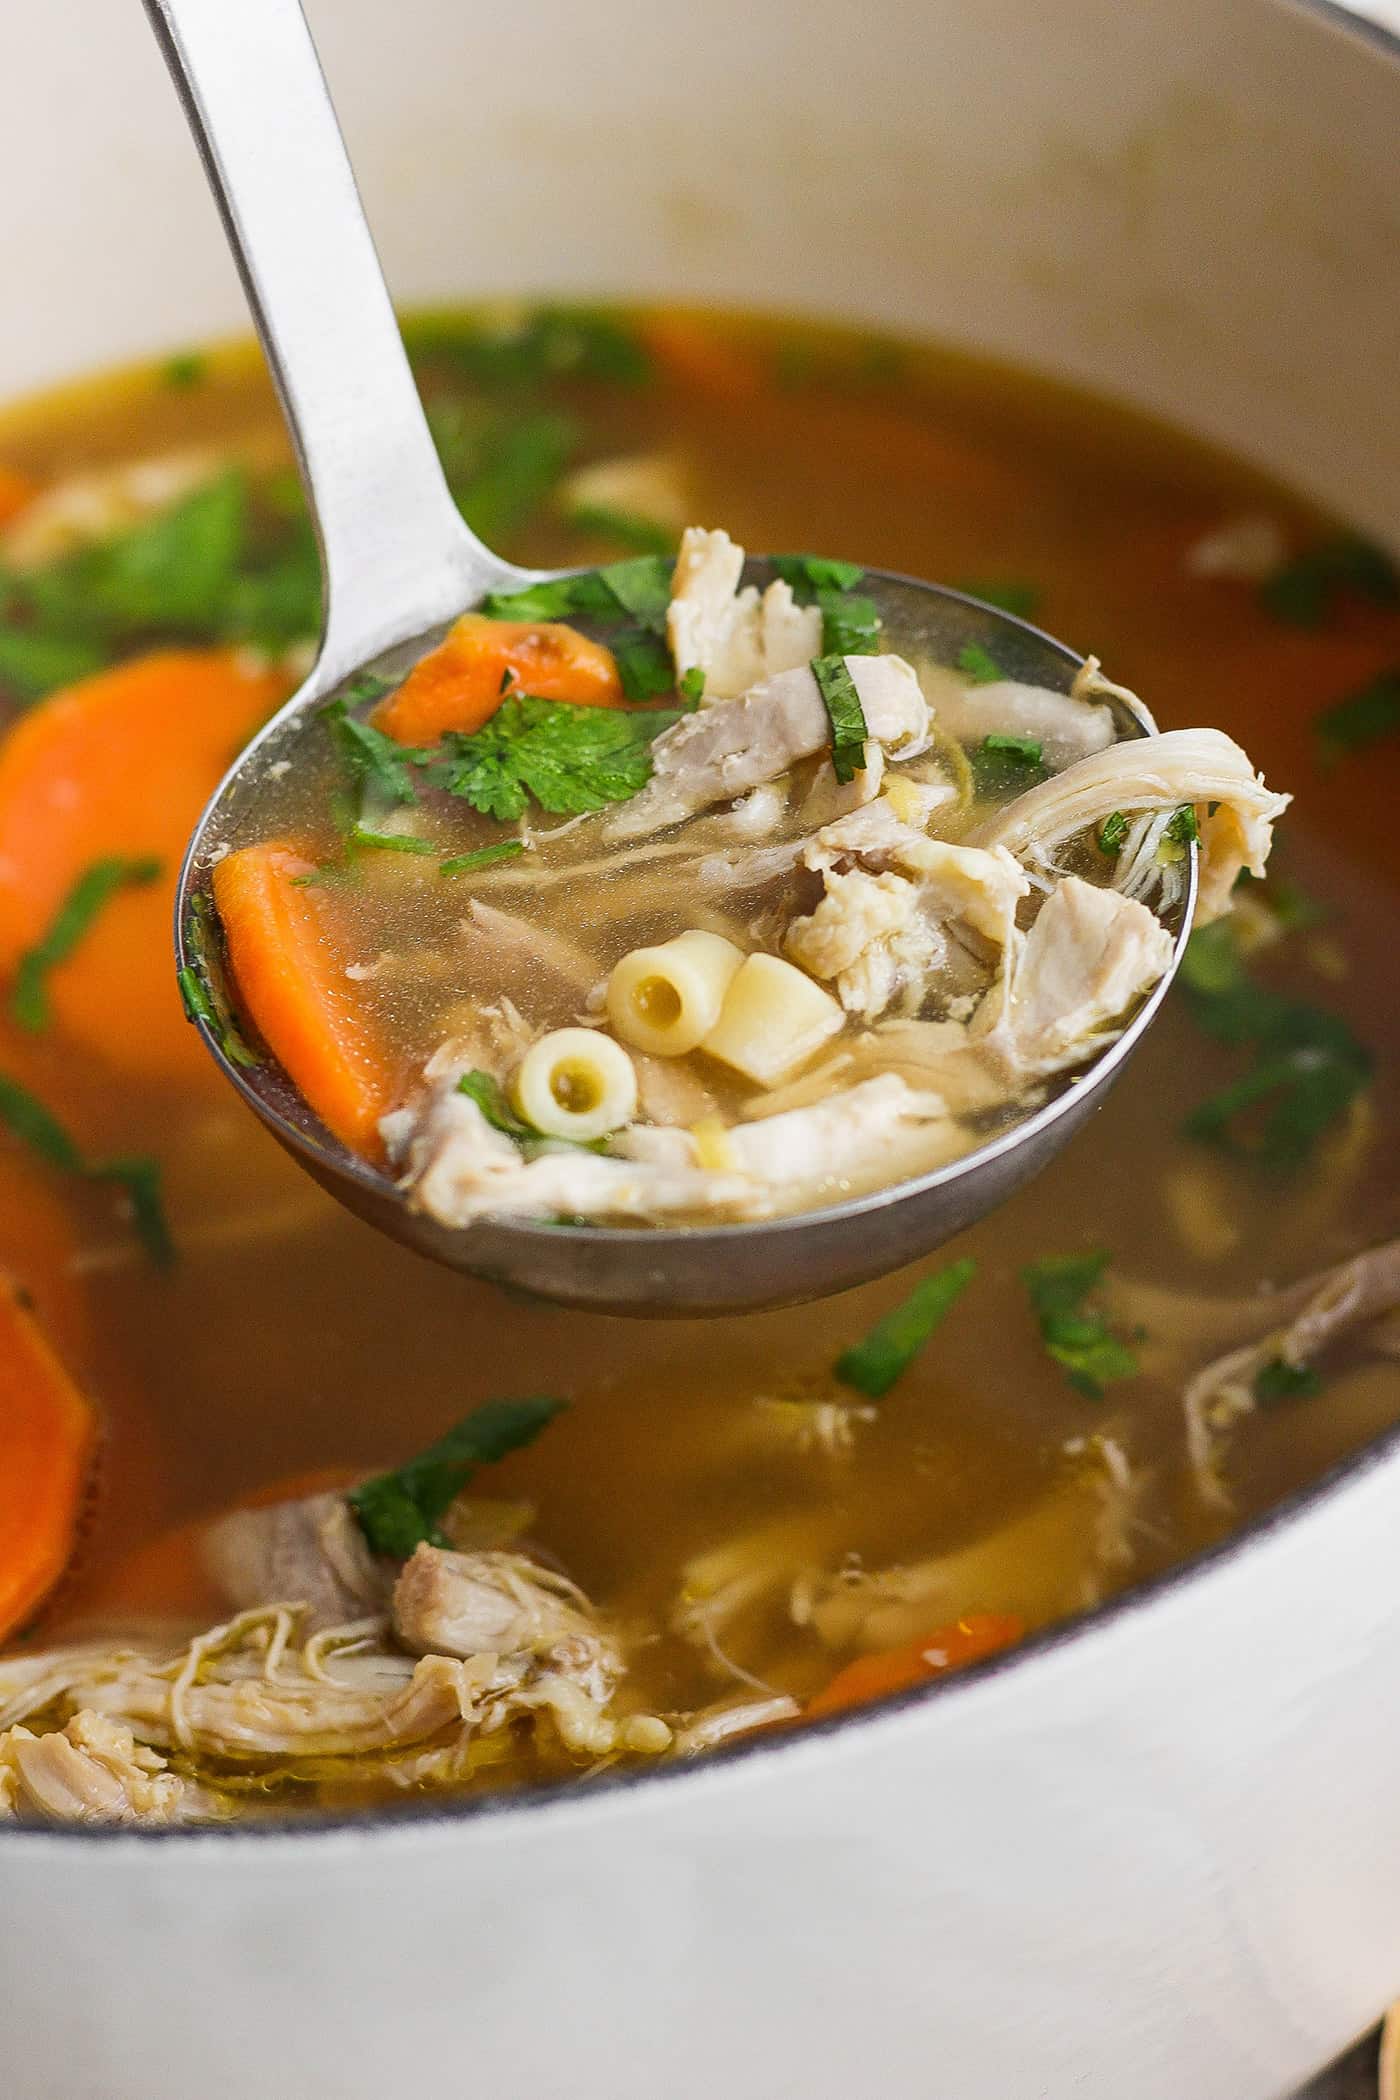 A ladleful of ginger chicken soup showing shredded chicken, pasta, and sweet potatoes.